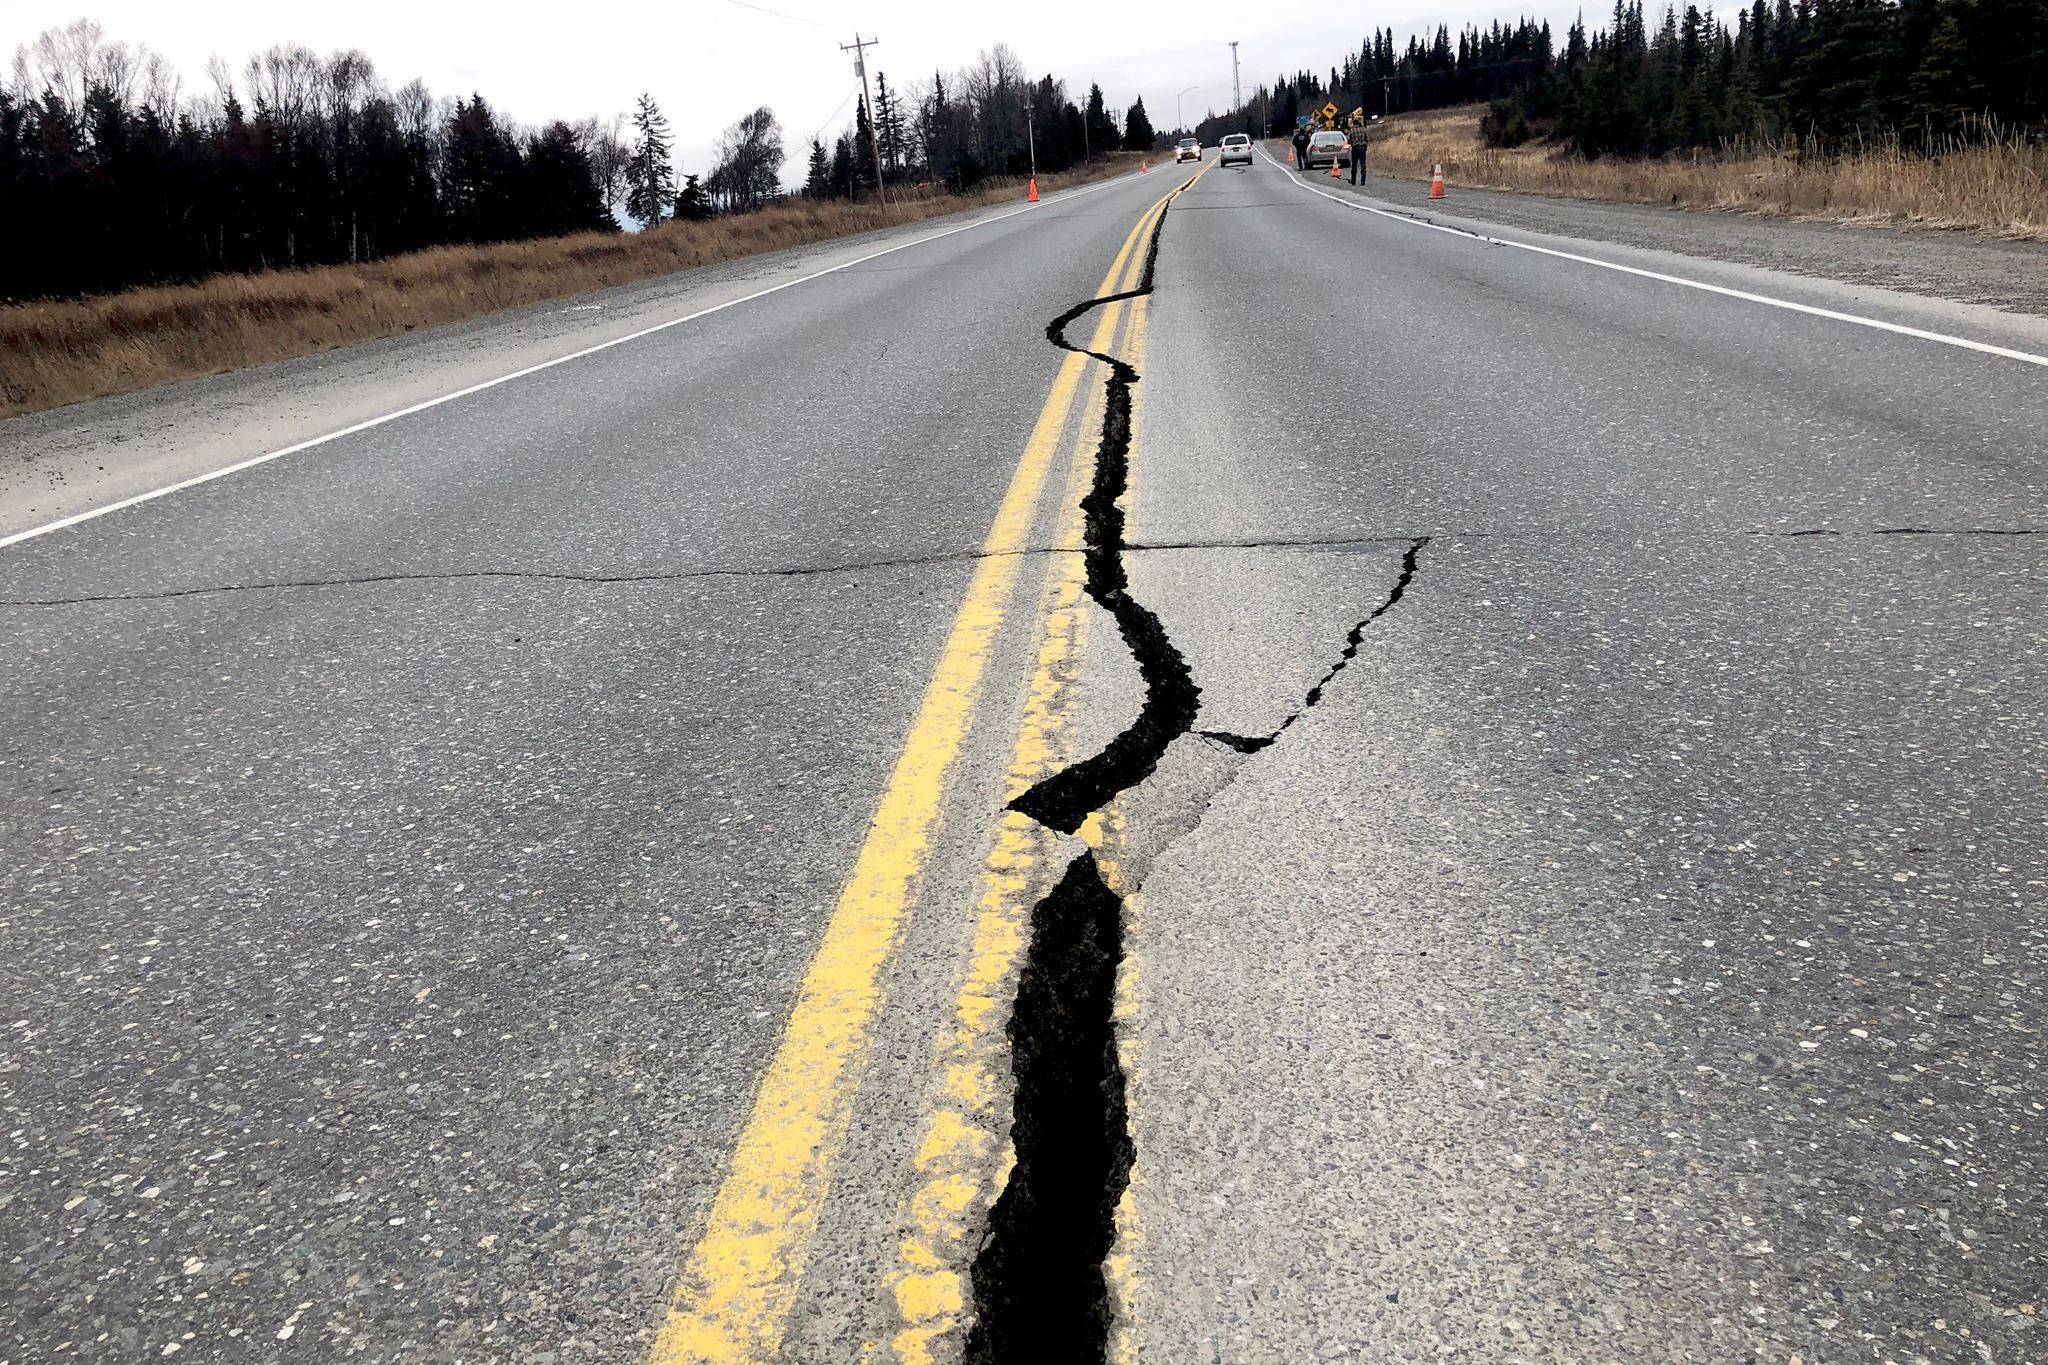 A long crack stretches along a length of road in Nikiski, Alaska on Friday, Nov. 30, 2018 due to a 7 magnitude earthquake that shook the Kenai Peninsula, along with the Anchorage, Wasilla and Palmer areas. (Photo by Victoria Petersen/Peninsula Clarion)